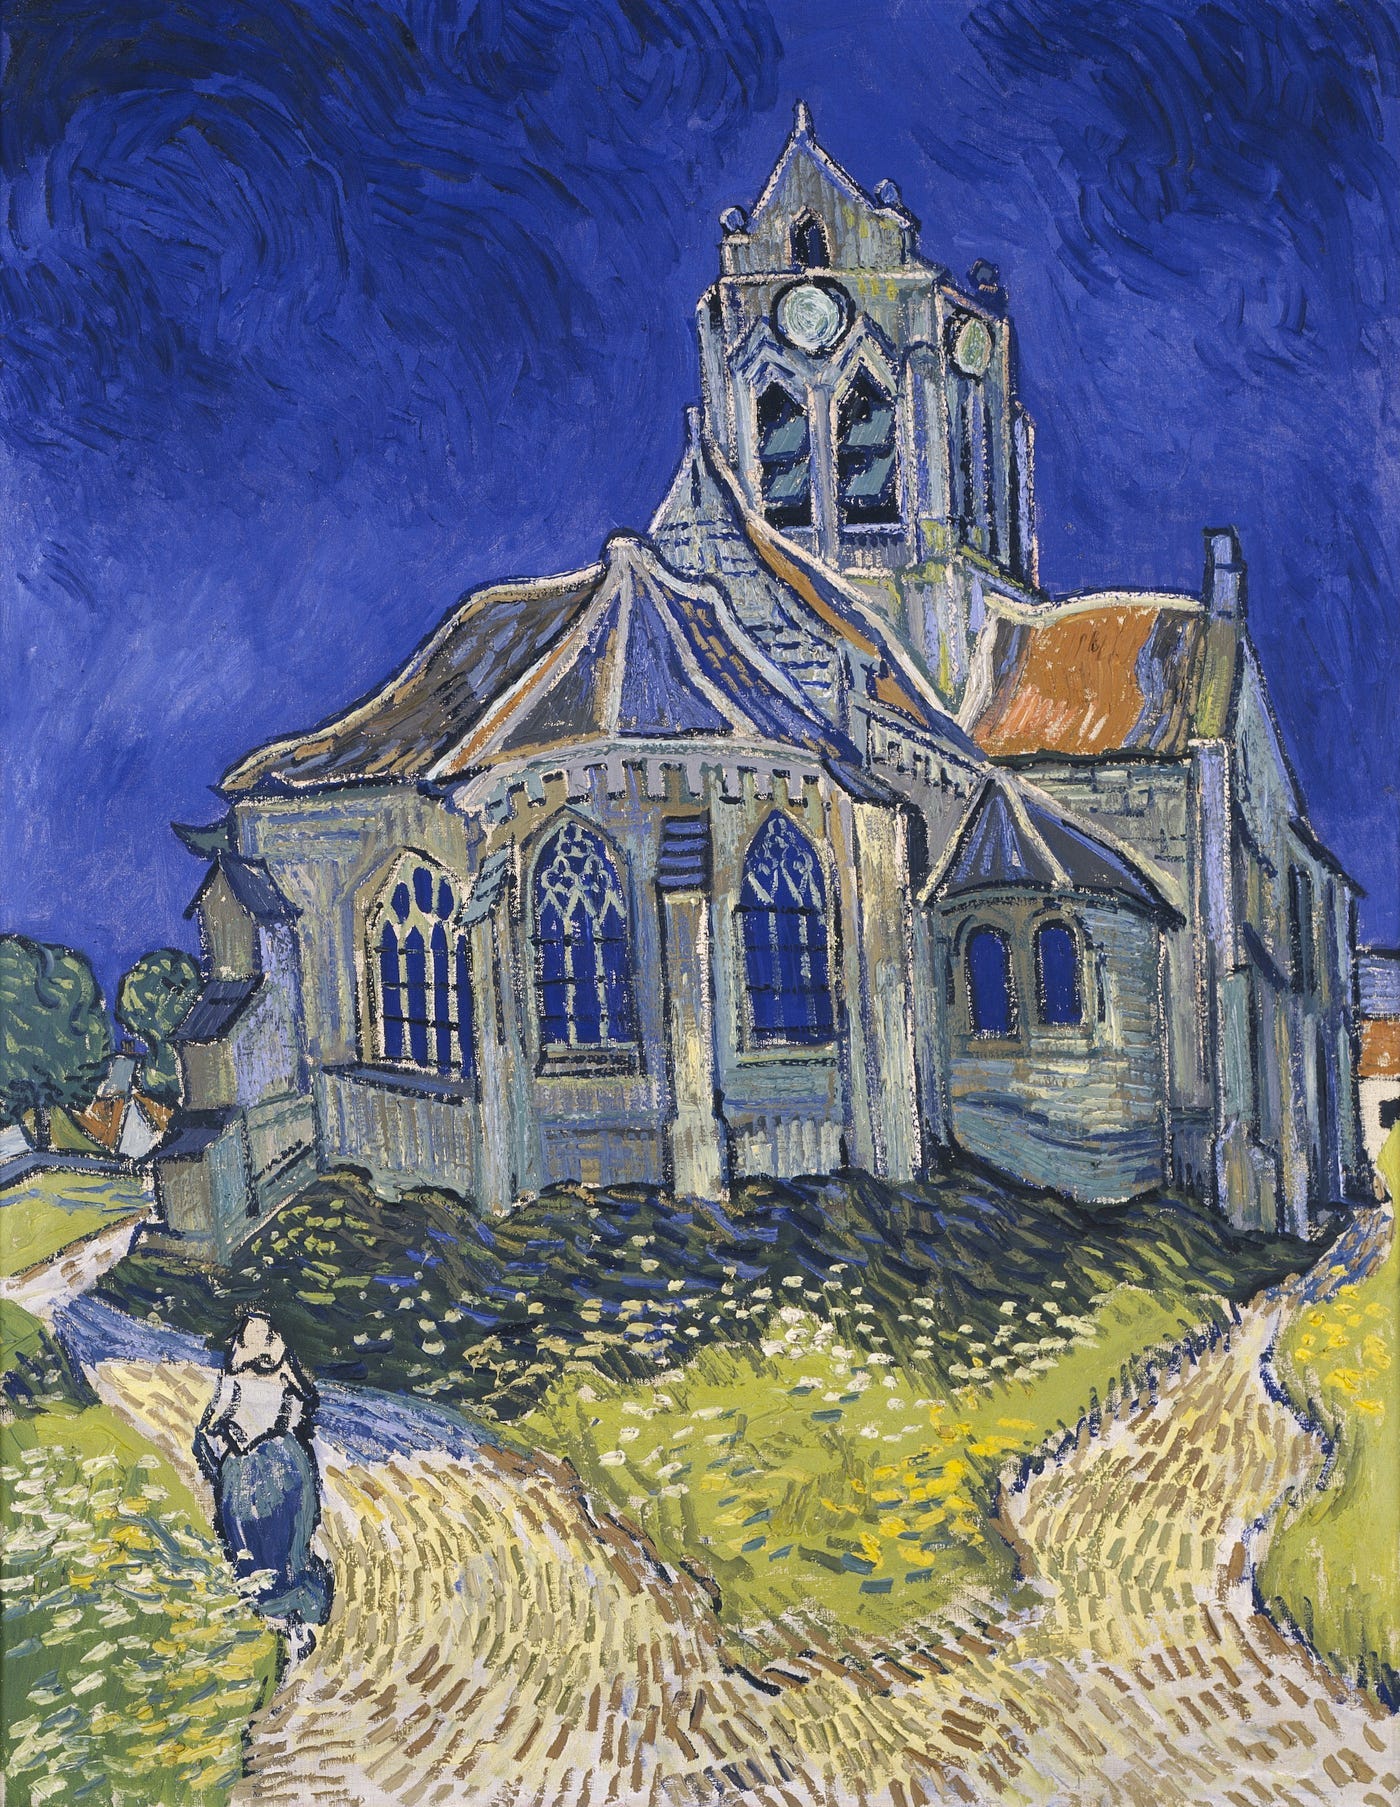 Church in the typical late Van Gogh style, so much more lively, bright, and nearly expressionist in his post-impressionist imaging than the sober church in Nuenen (which I haven’t added to this article).